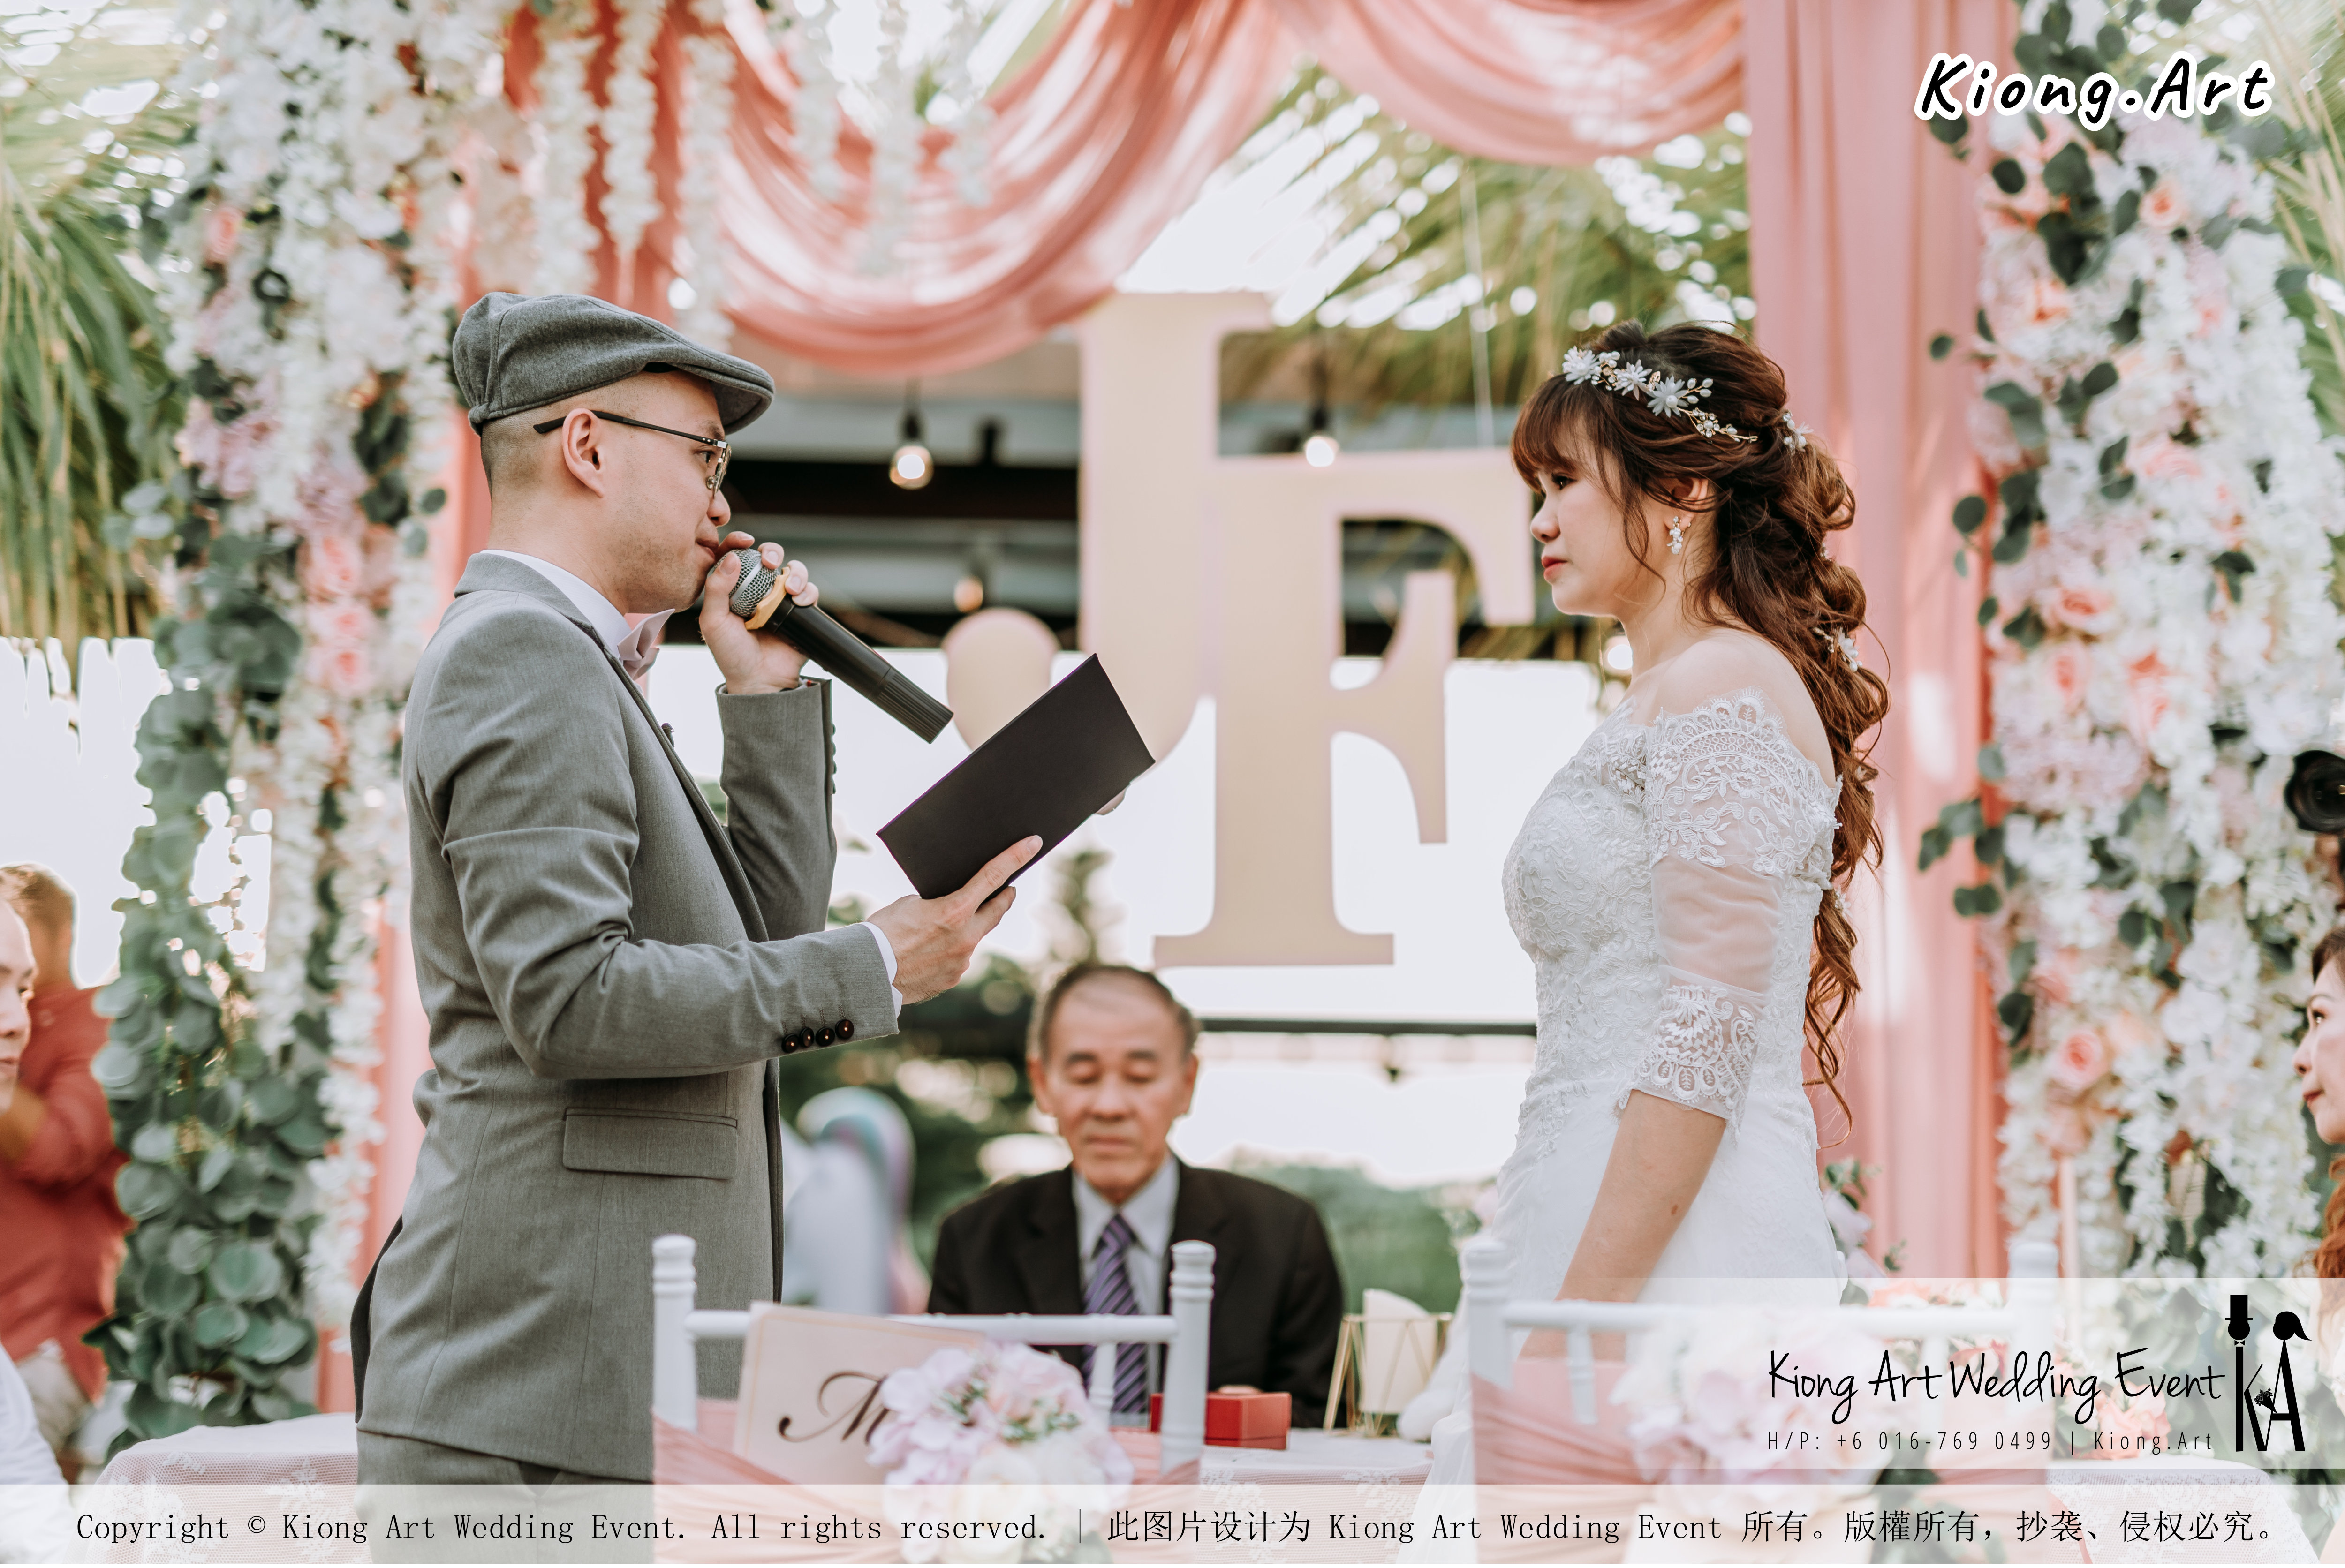 Malaysia Kuala Lumpur Wedding Decoration Kiong Art Wedding Deco Eternal Registration of Marriage Ceremony Open-air Party of Jack and Fish ROM at Kluang Container Hotel A14-A01-118